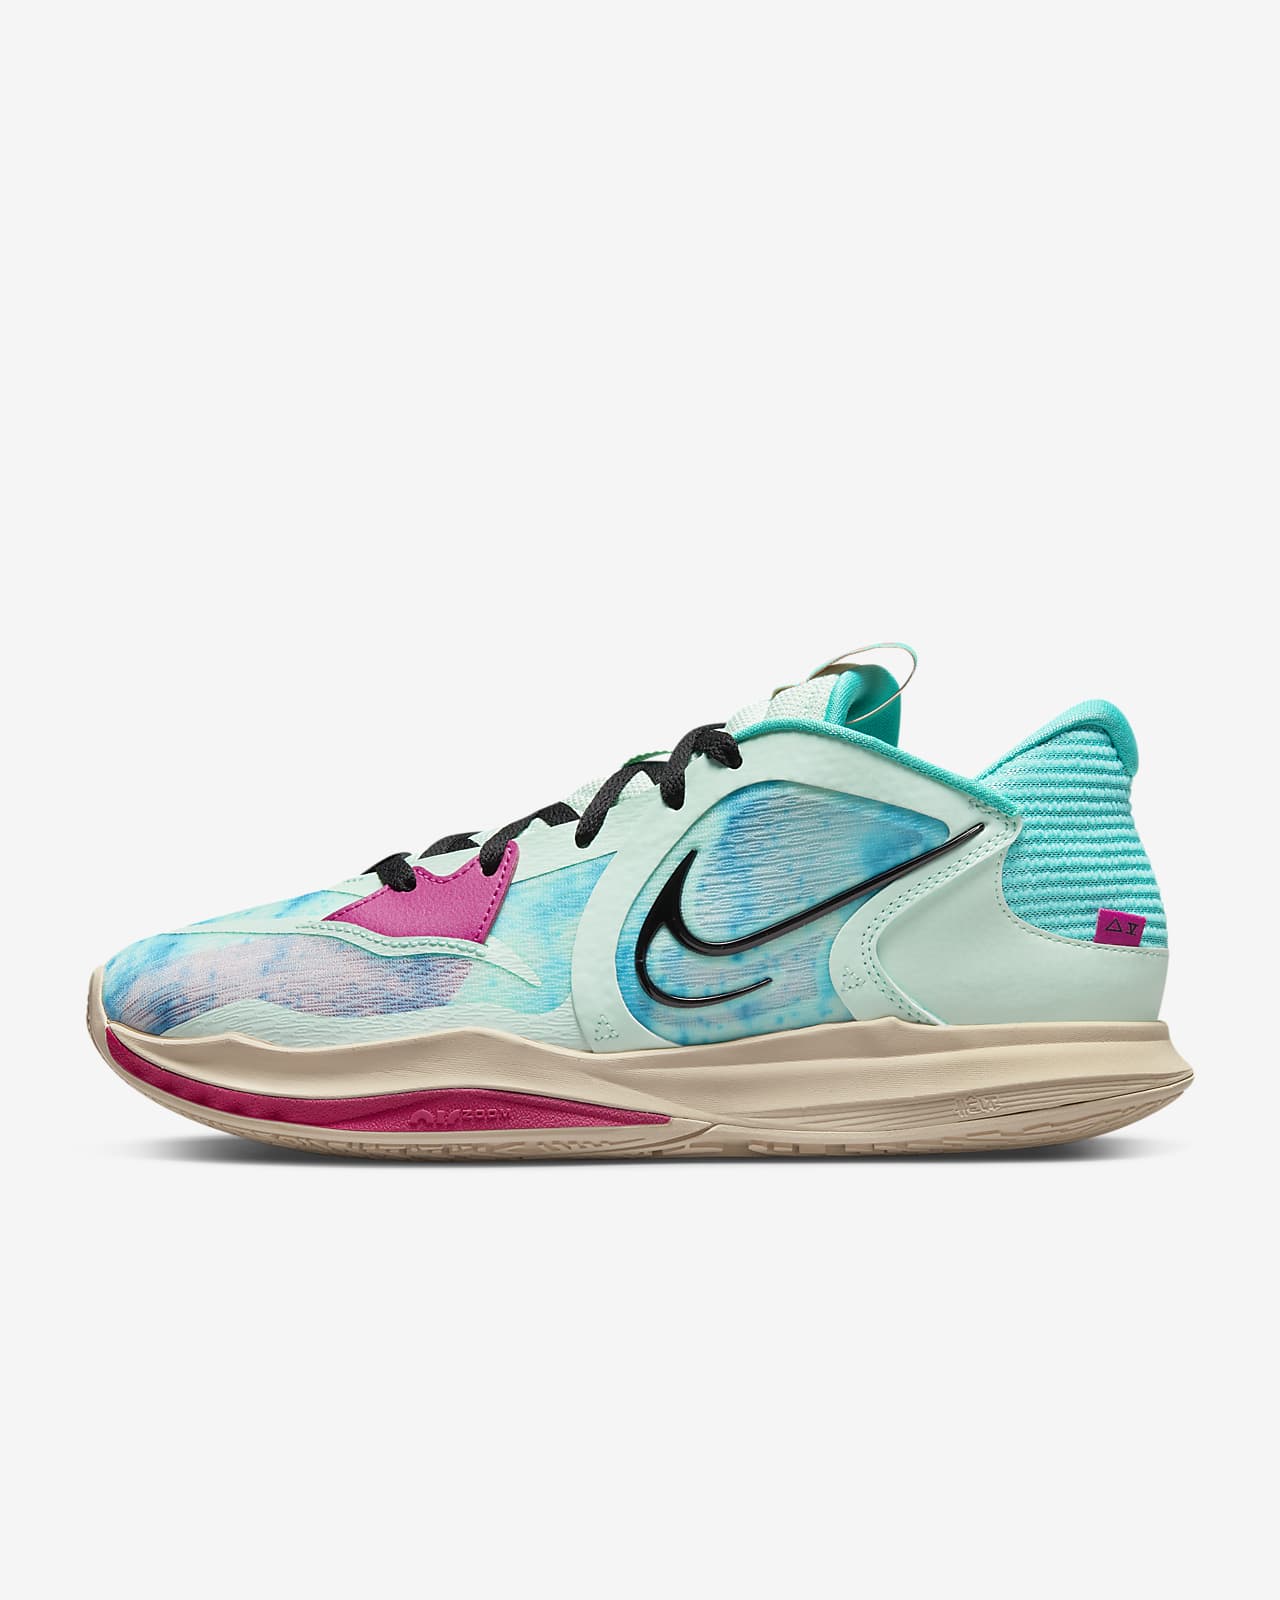 Kyrie Low 5 Community "Jewell Loyd" Basketball Shoes